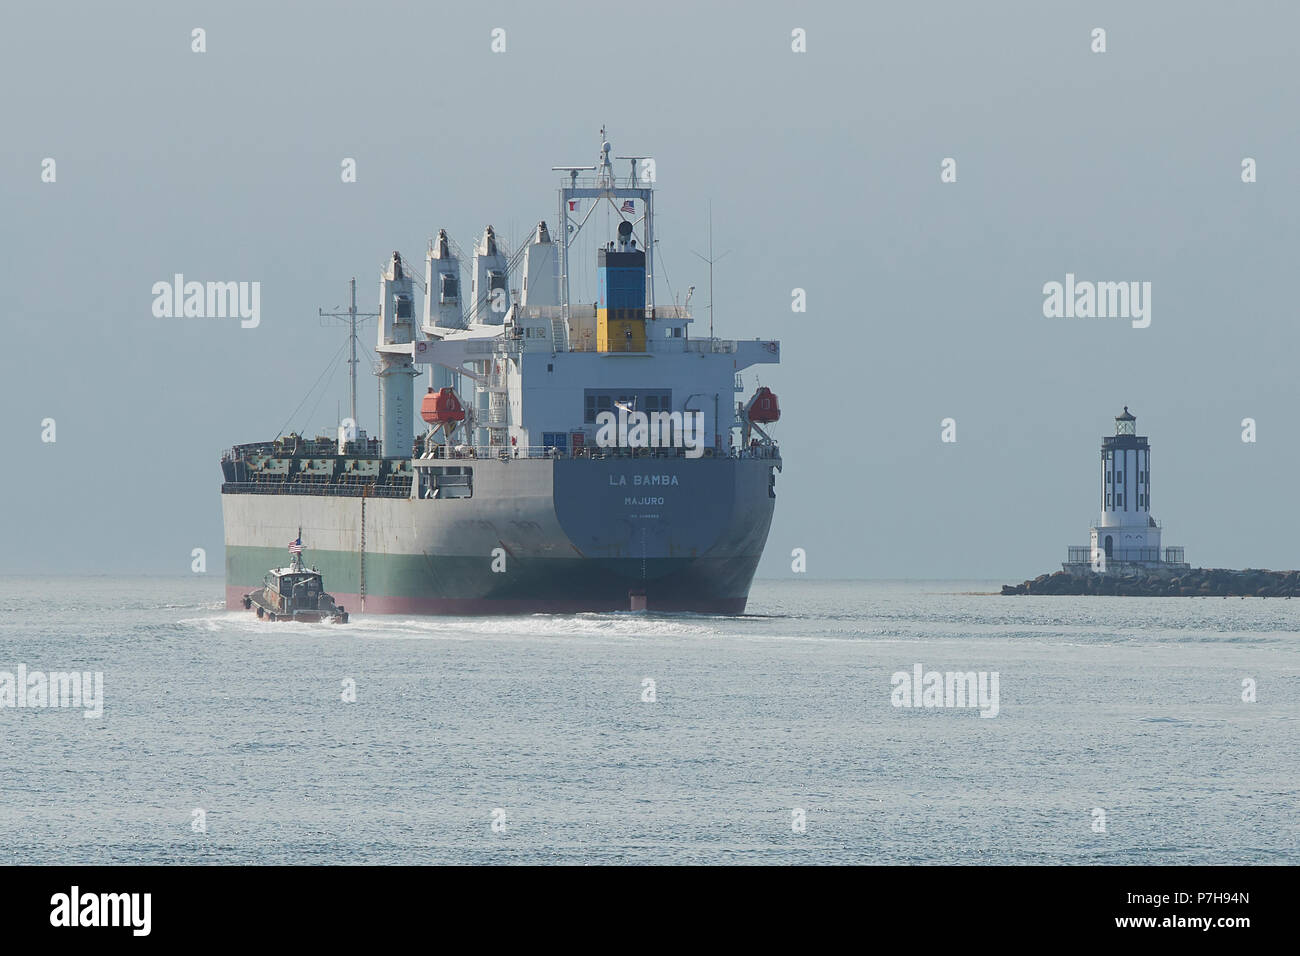 Harbor Pilot Boat Follows The Bulk Carrier, LA BAMBA, Under Way And Leaving The Port Of Los Angeles, California. The Angels Gate Lighthouse to The Rig Stock Photo